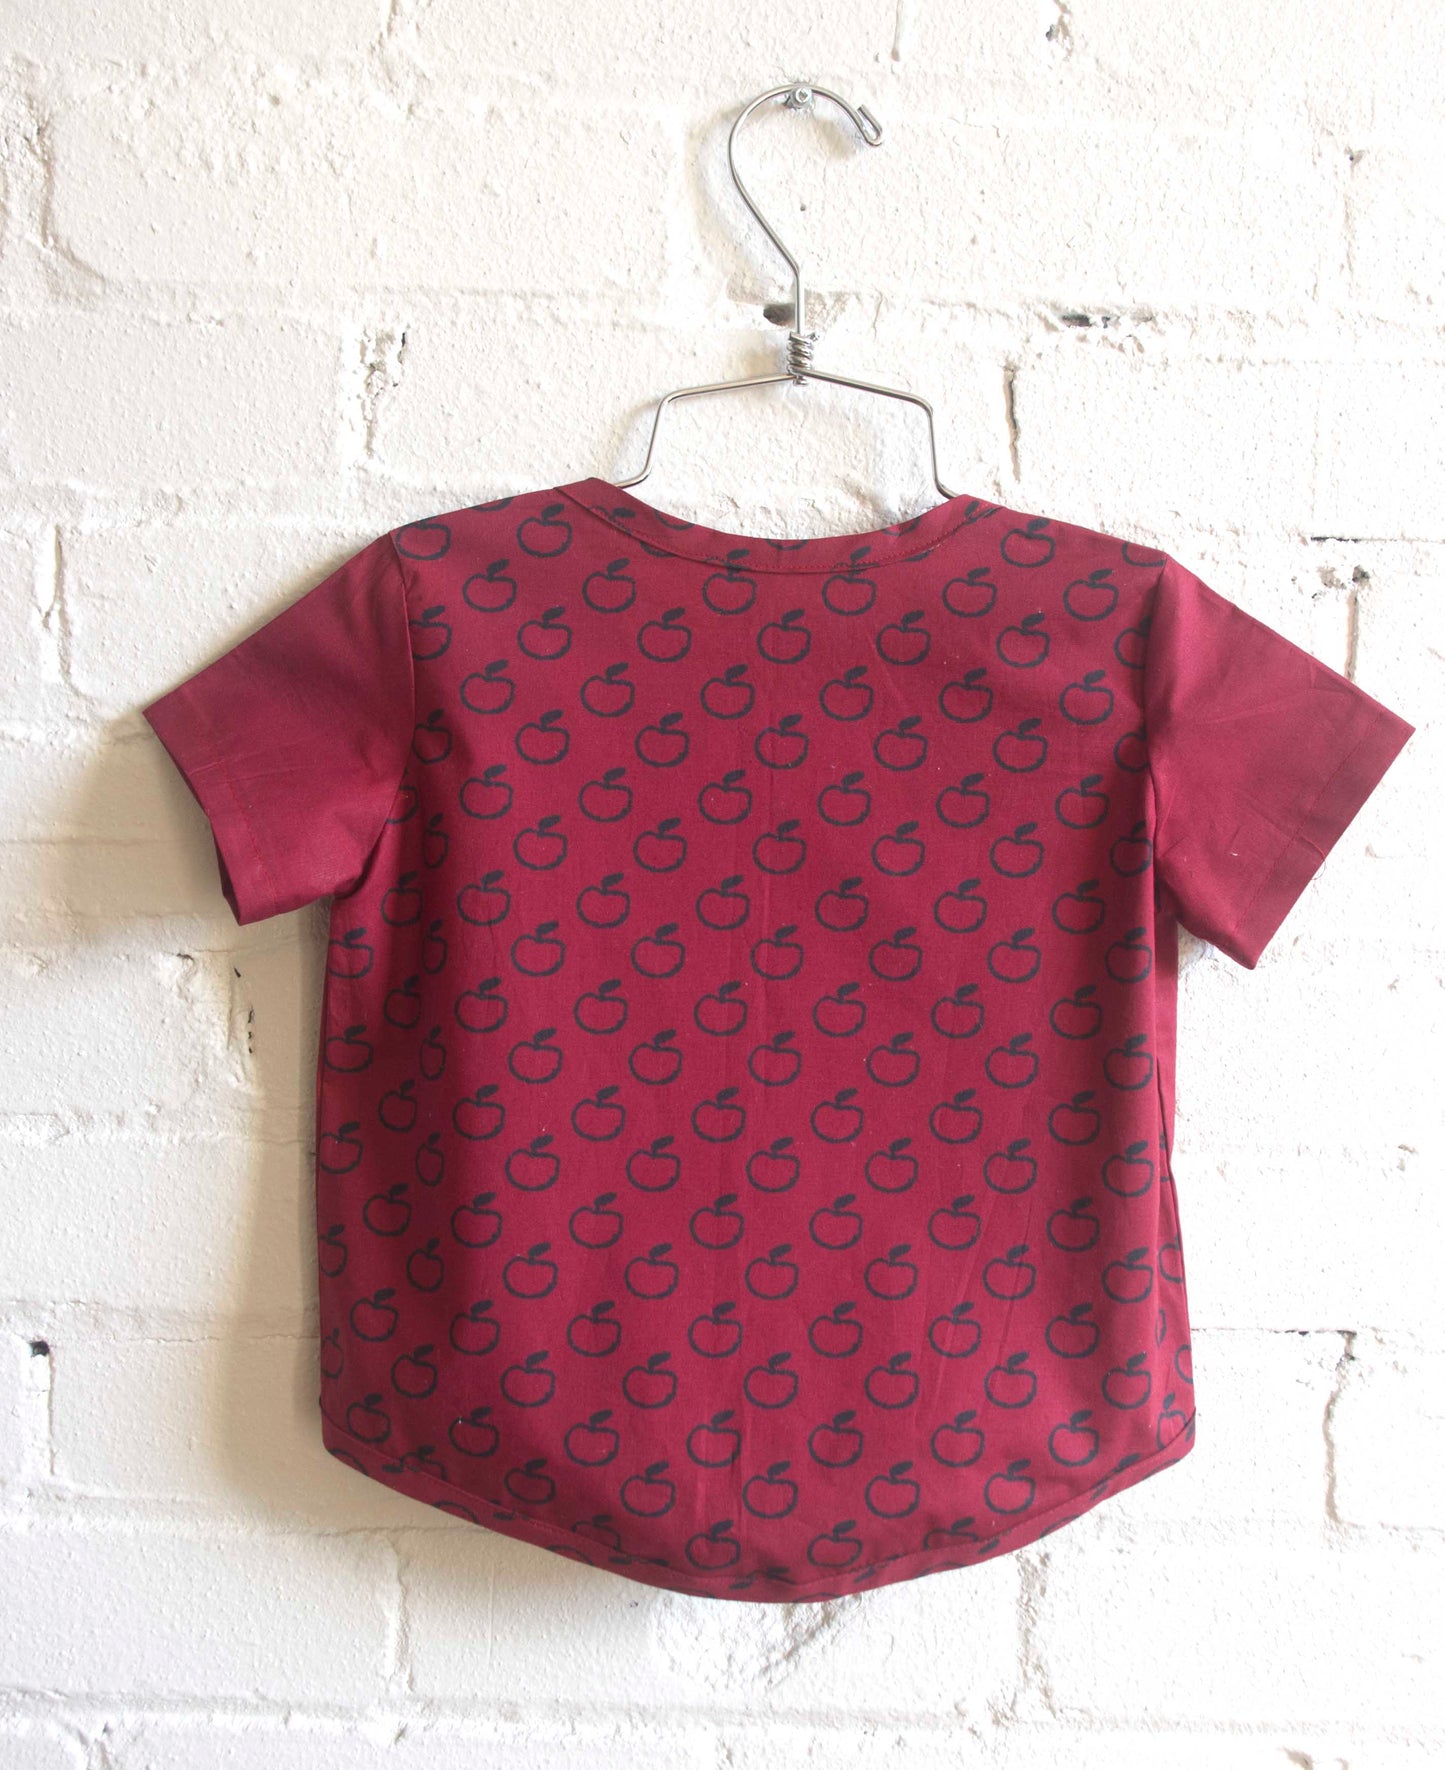 Baby Shirt Pattern - The Freebie for little Beebies